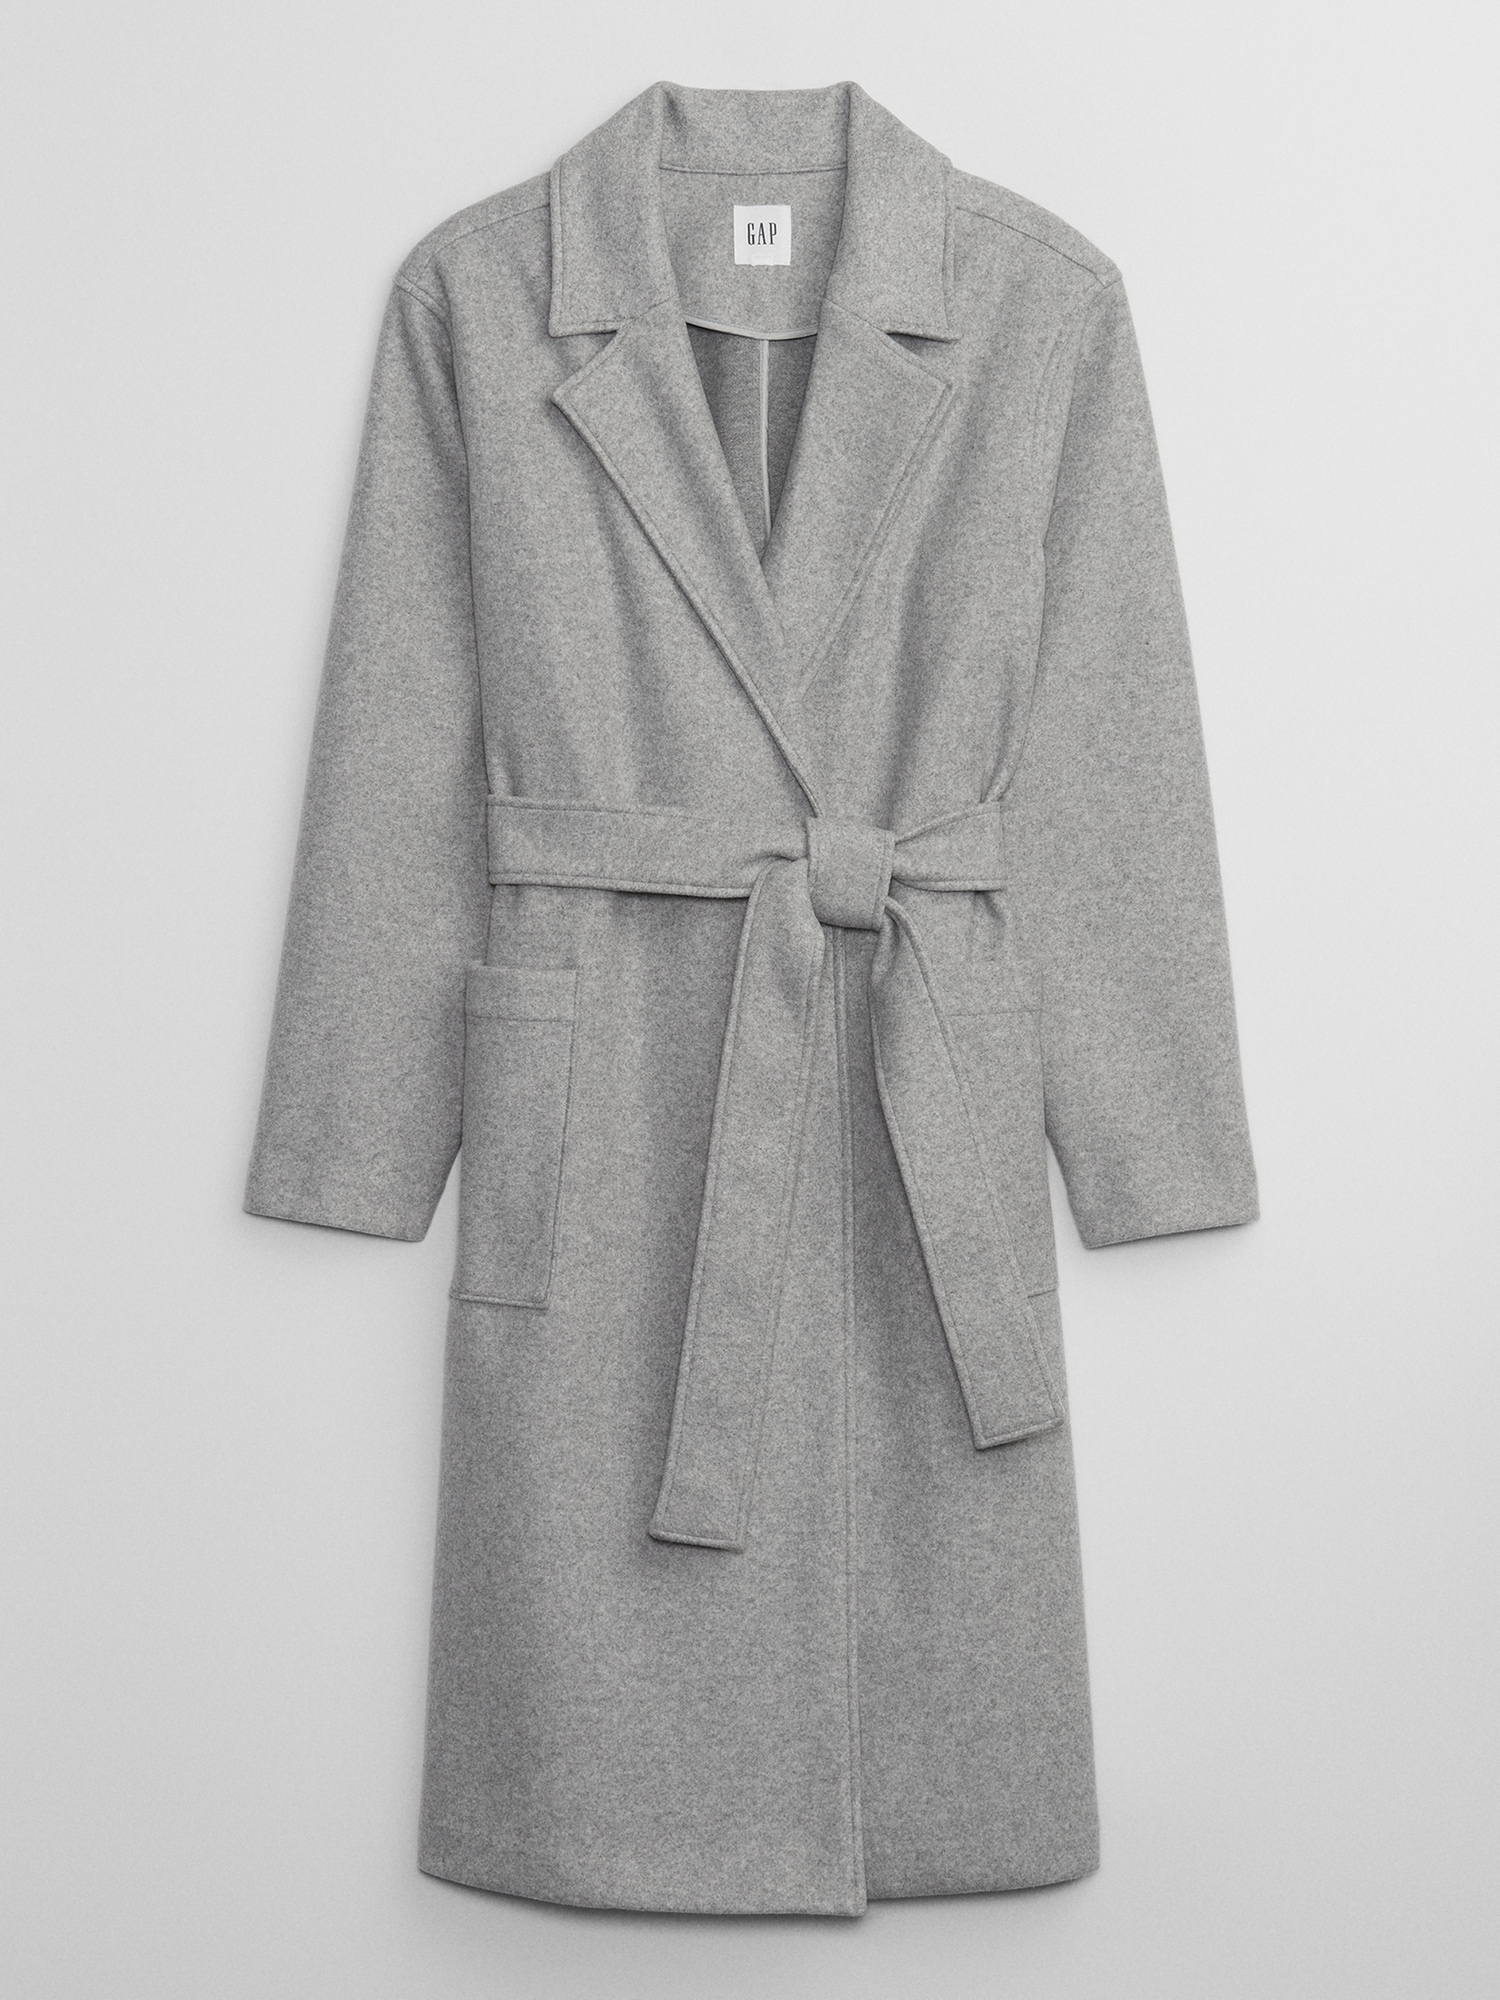 Relaxed Open-Front Topcoat | Gap Factory